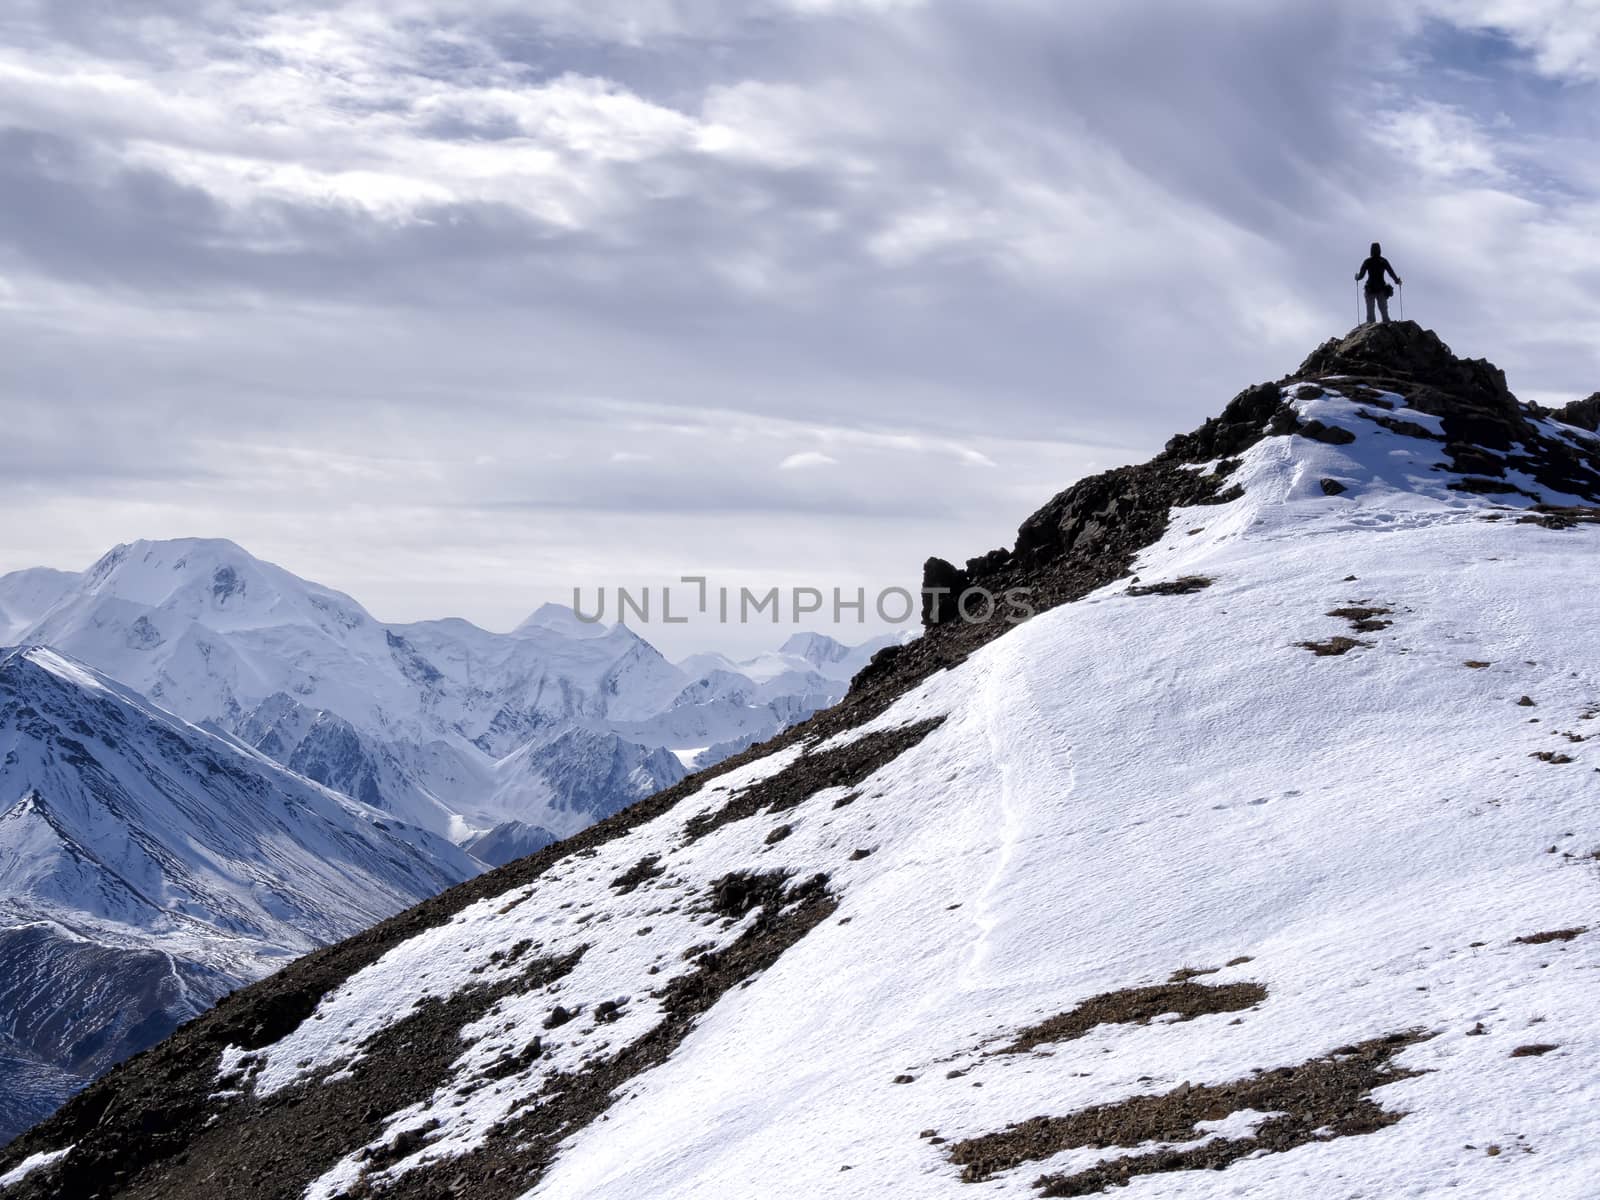 Mt. Mckinley in View - Lone Climber by leieng